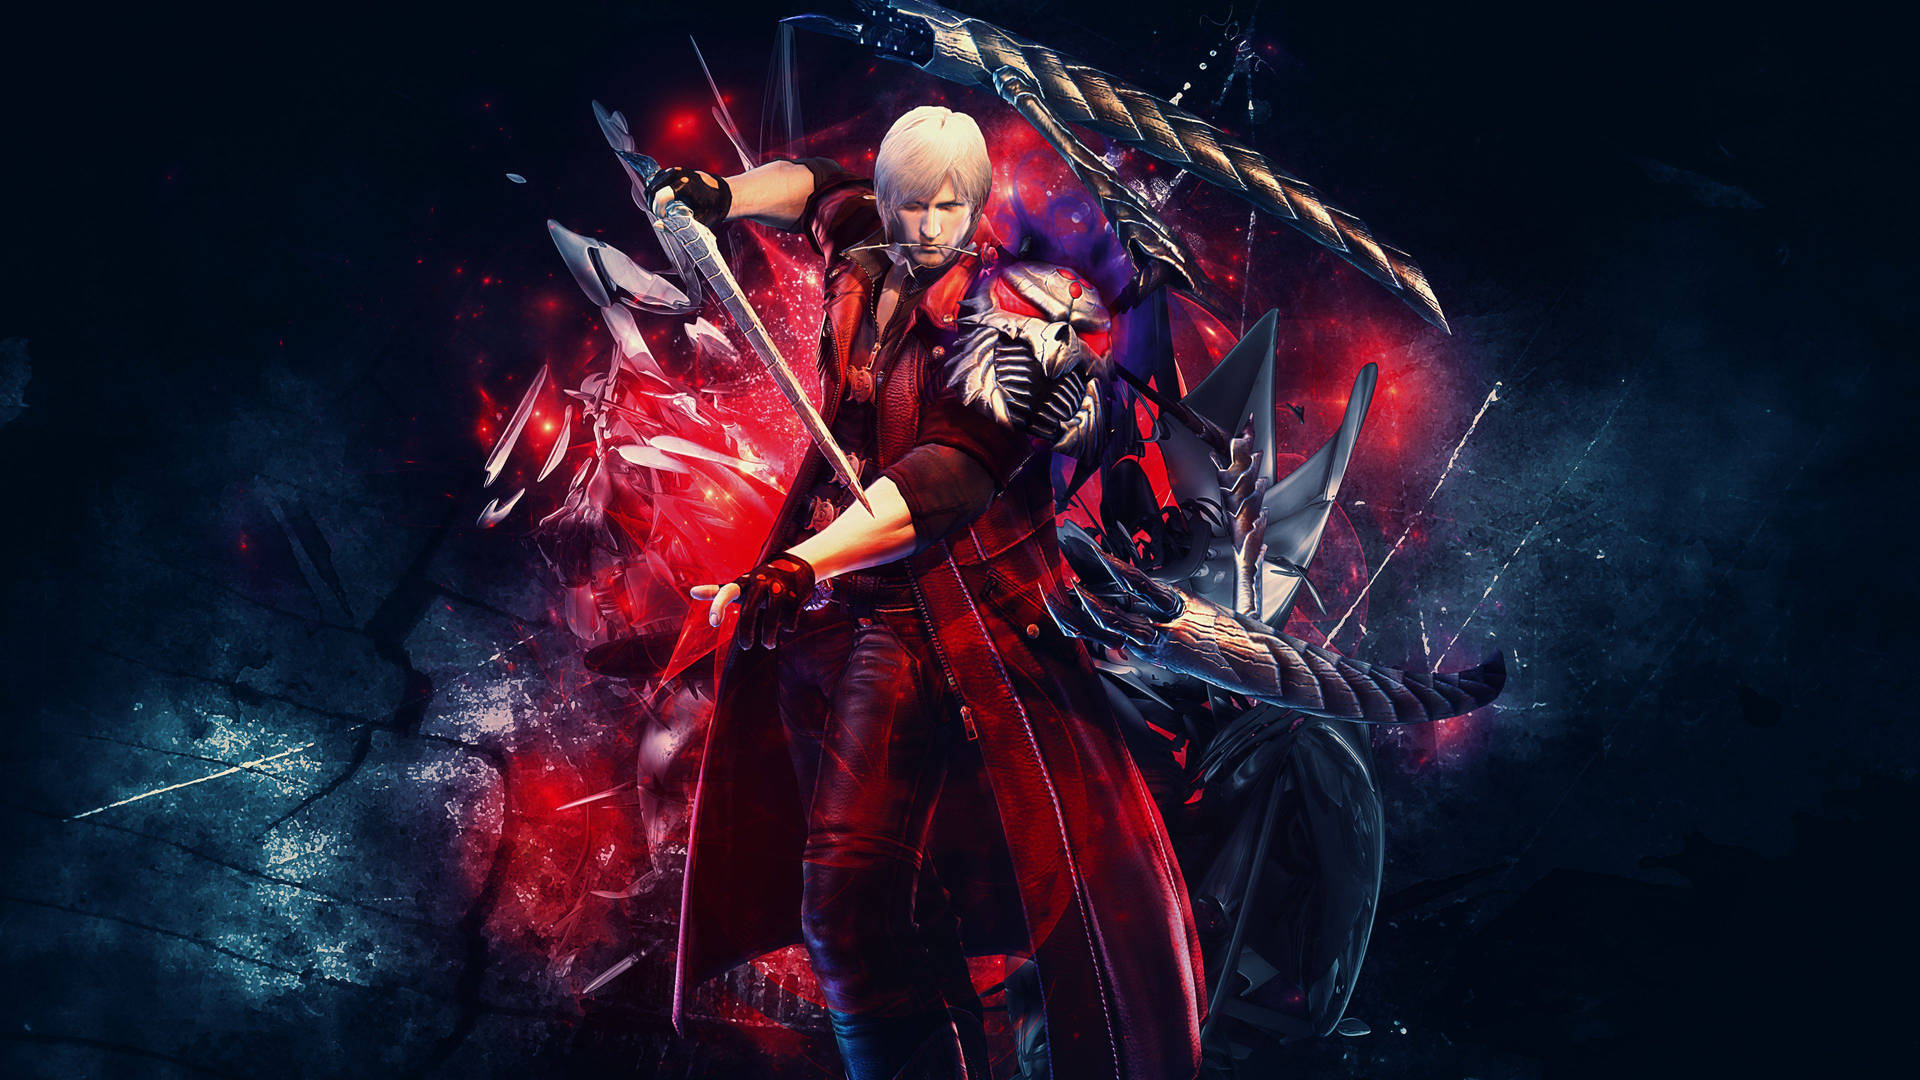 Devil May Cry Dante Sword Stance